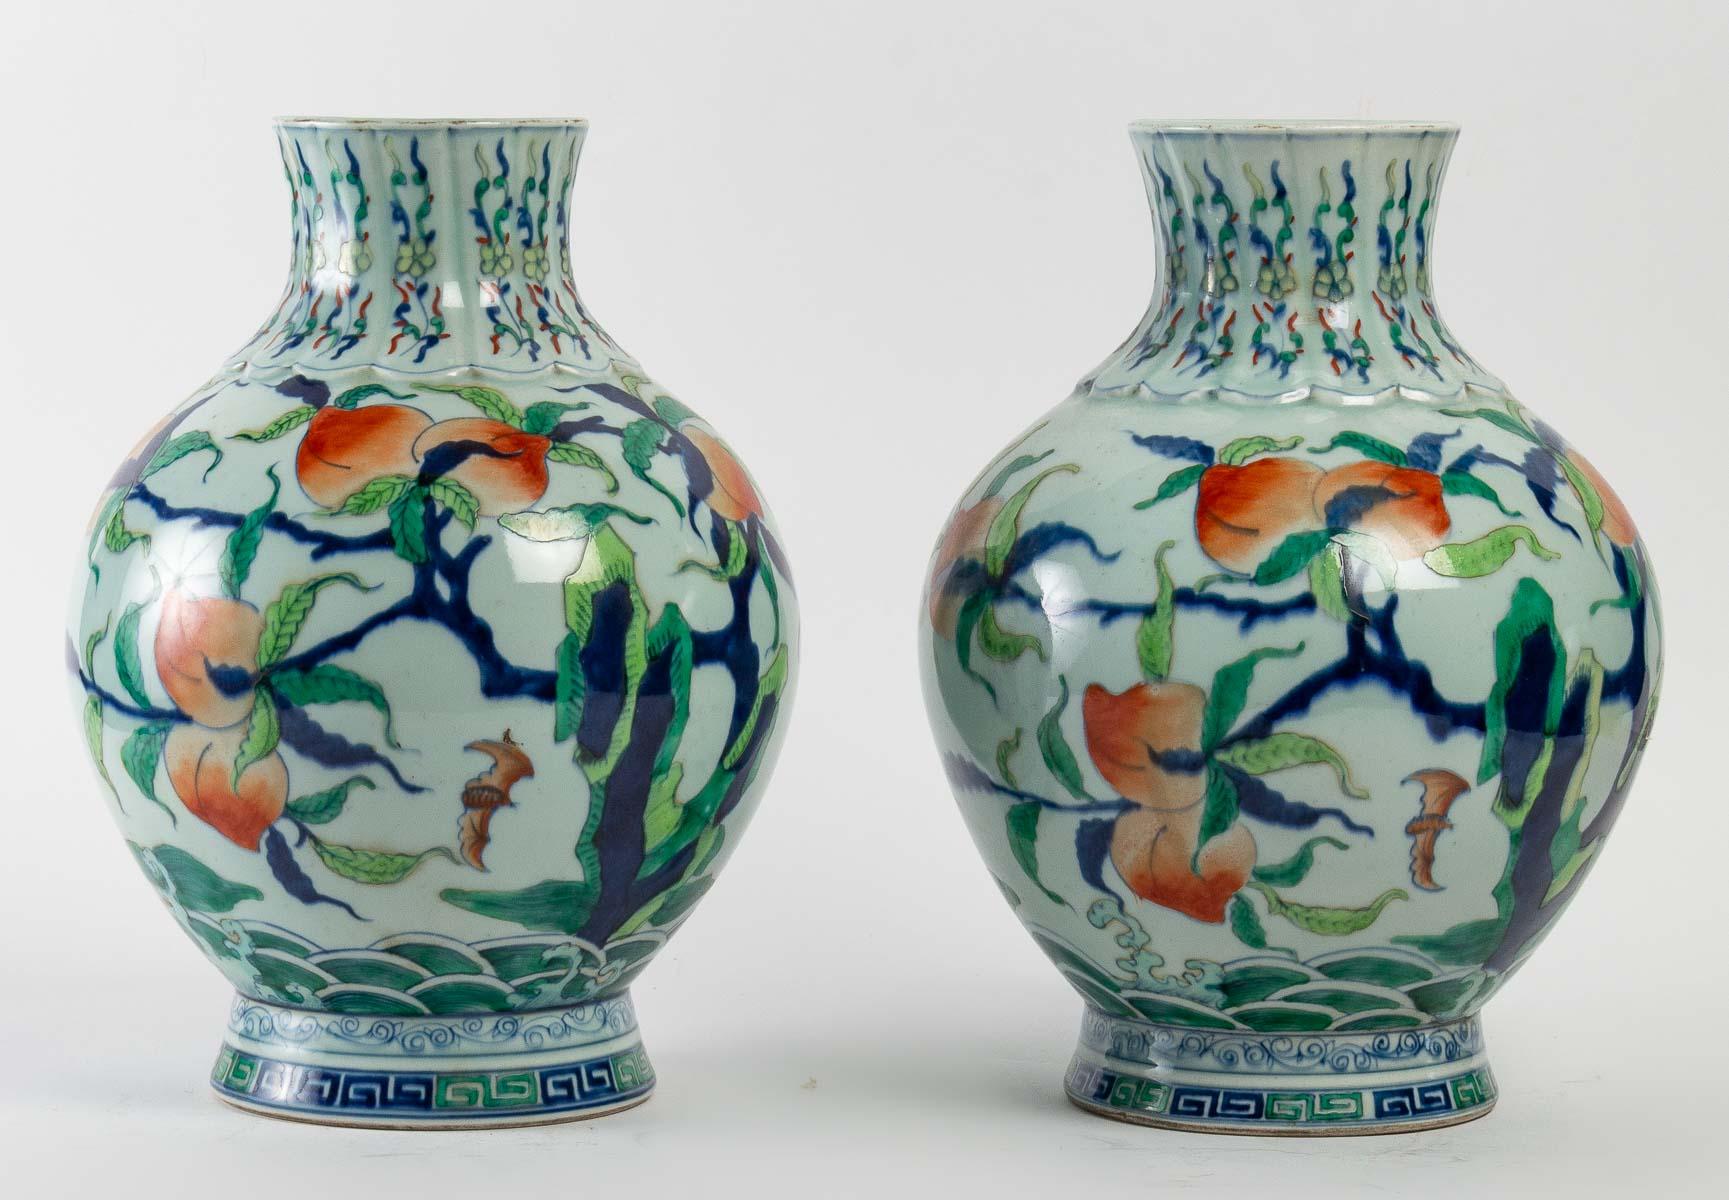 Pair of Porcelain Vases with Peach of Longevity decoration, mark on the bottom of the vases.
China, 20th century.
Perfect condition.
Measure: H: 36 cm, D: 25 cm.